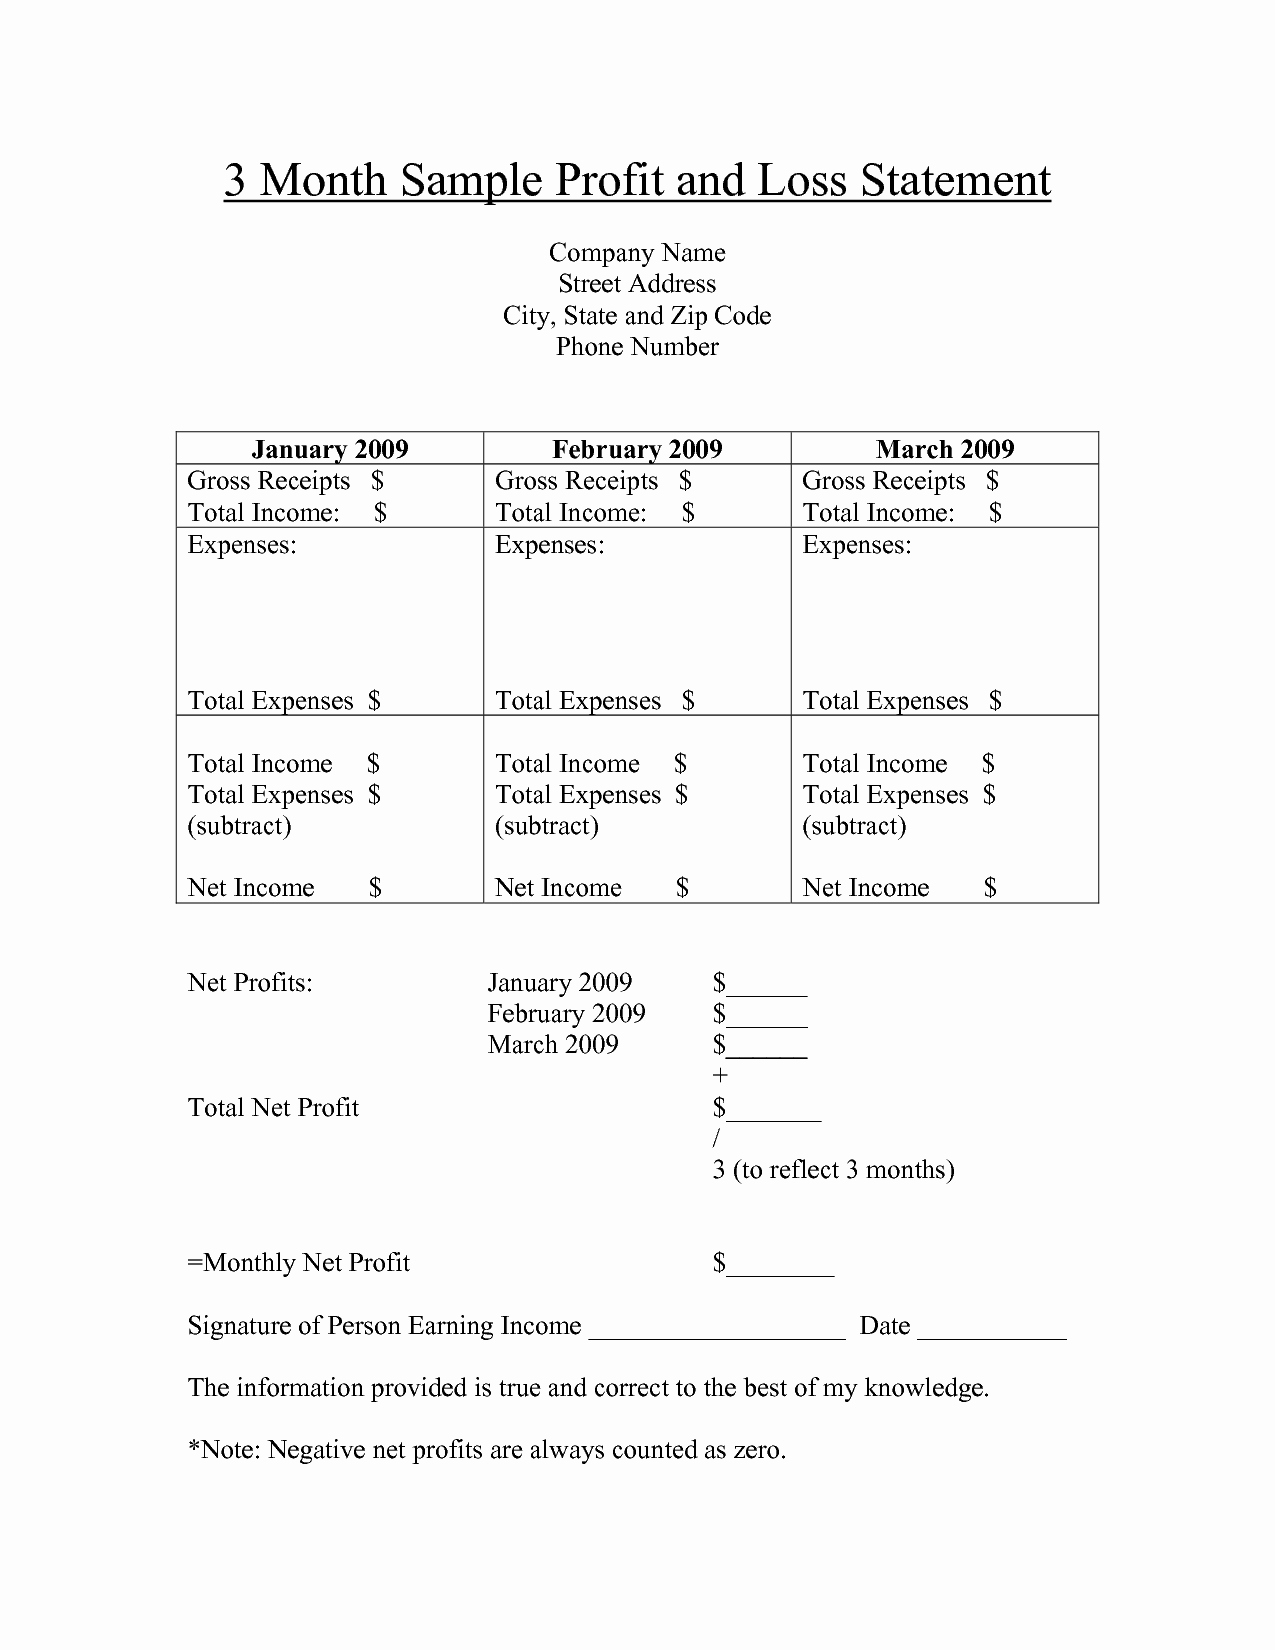 Profit and Loss Report Template Fresh Free Printable Profit and Loss Statement form for Home